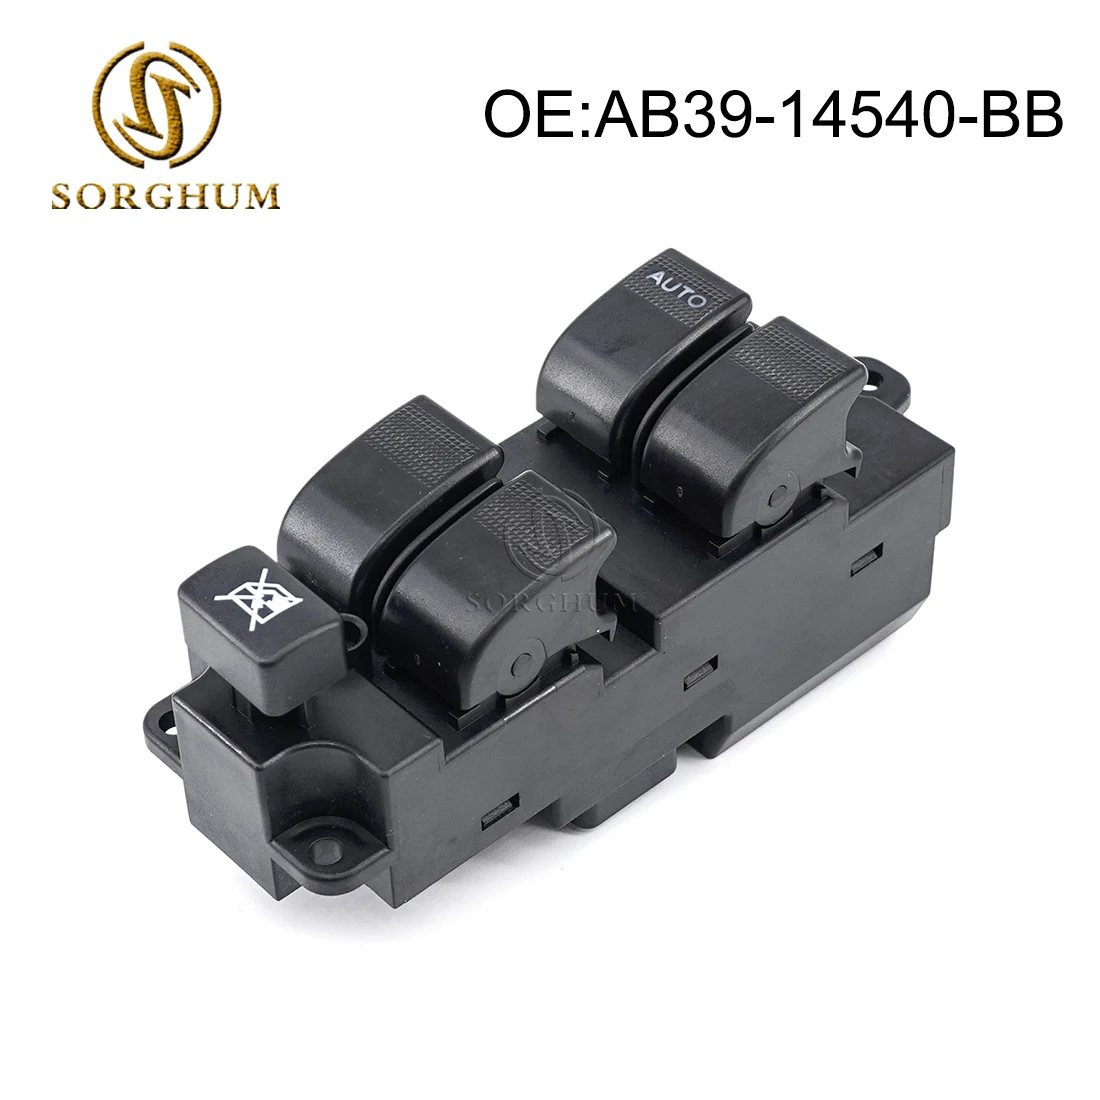 Sorghum LHD Front Left Side Master Window Control Switch Regulator AB39-14540-BB For Ford Ranger Mazda BT-50 4 Door AB3914540BB